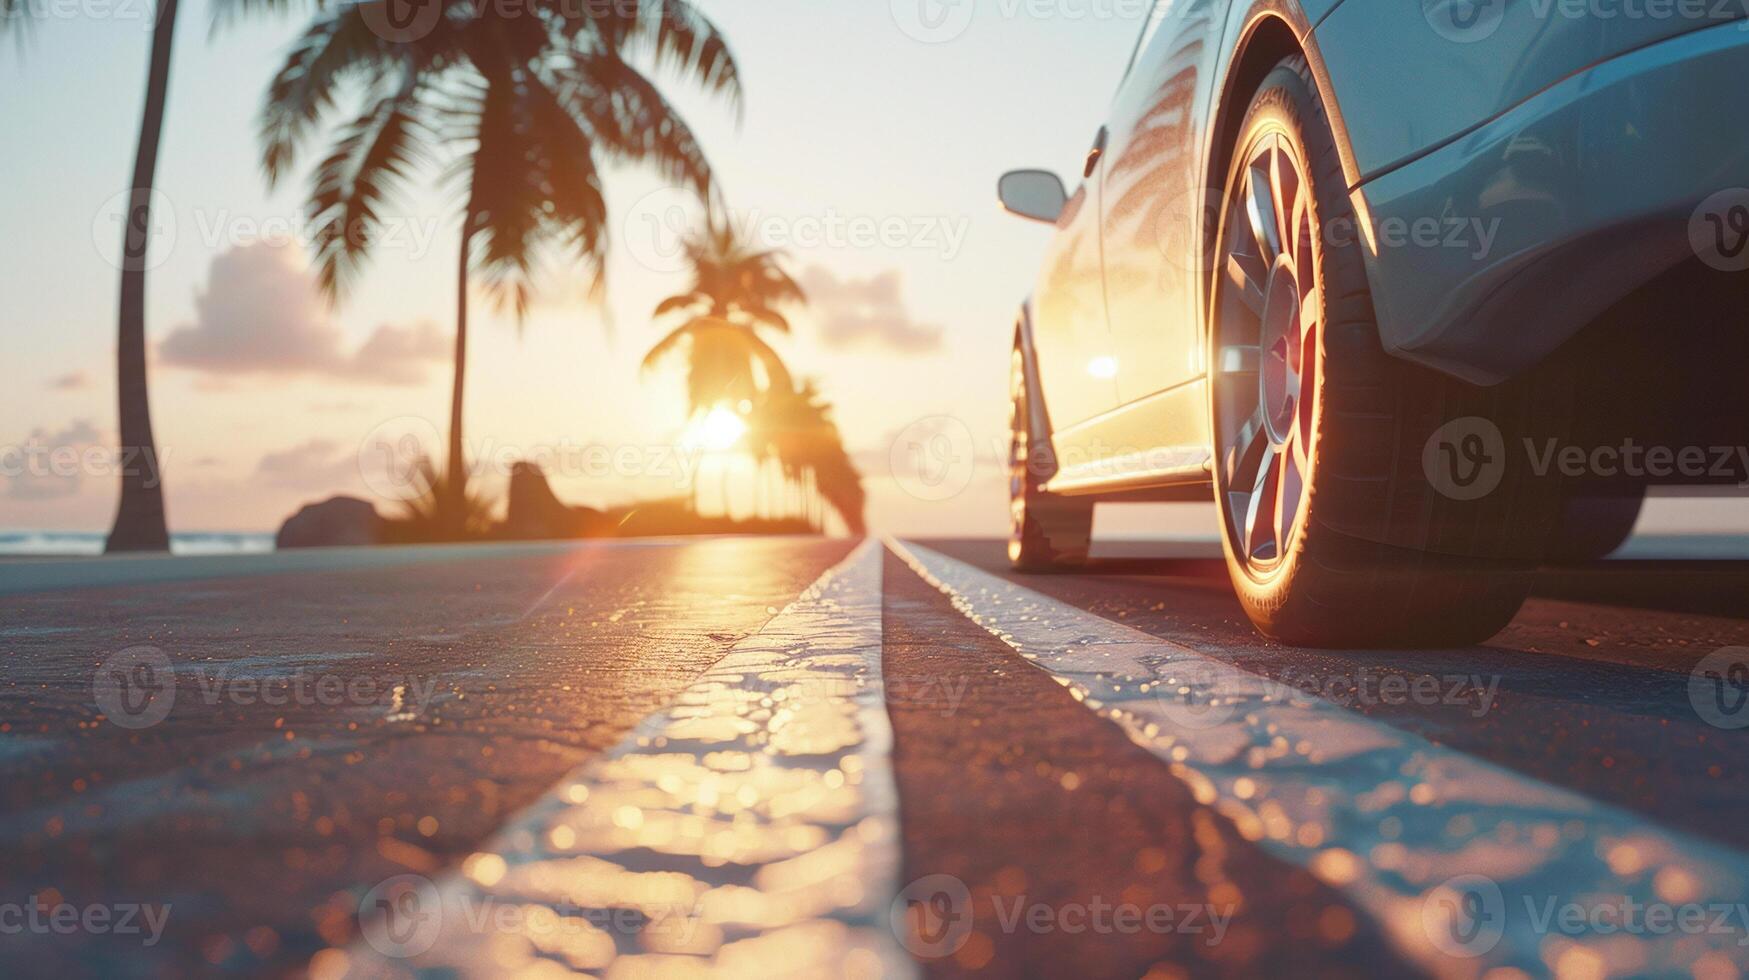 Banner sunset road trip, luxury car on tropical beach road, palm trees, travel lifestyle, dream vacation, golden hour serene scene photo